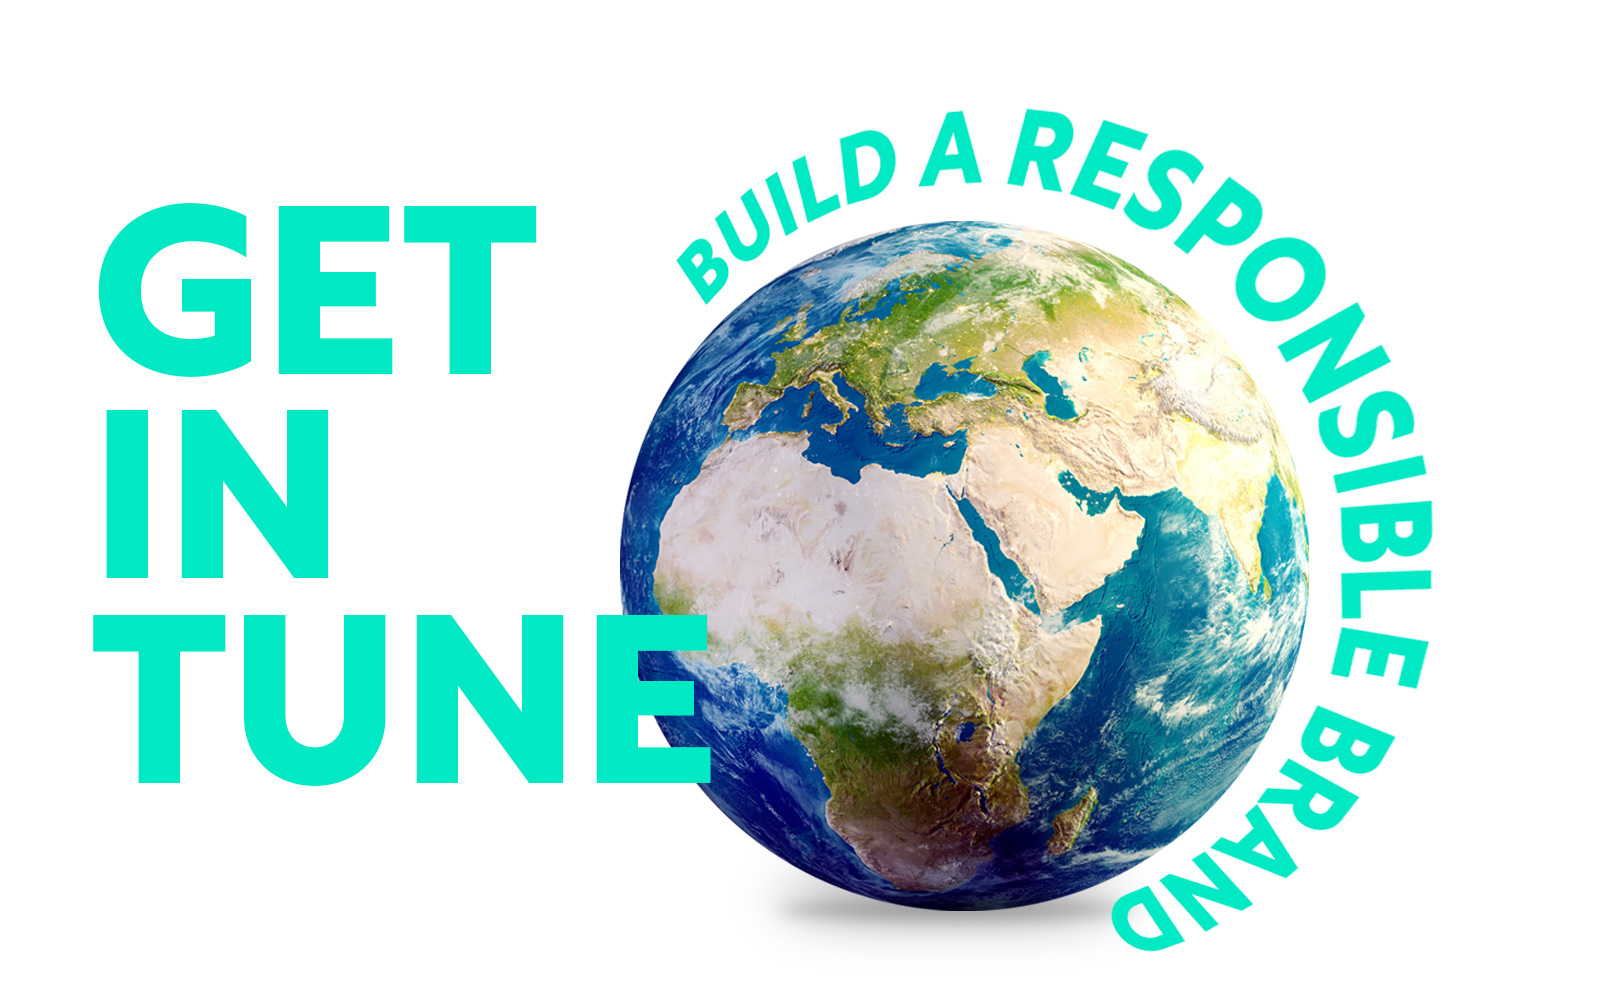 Image of the planet - Build a responsible brand with Osmil